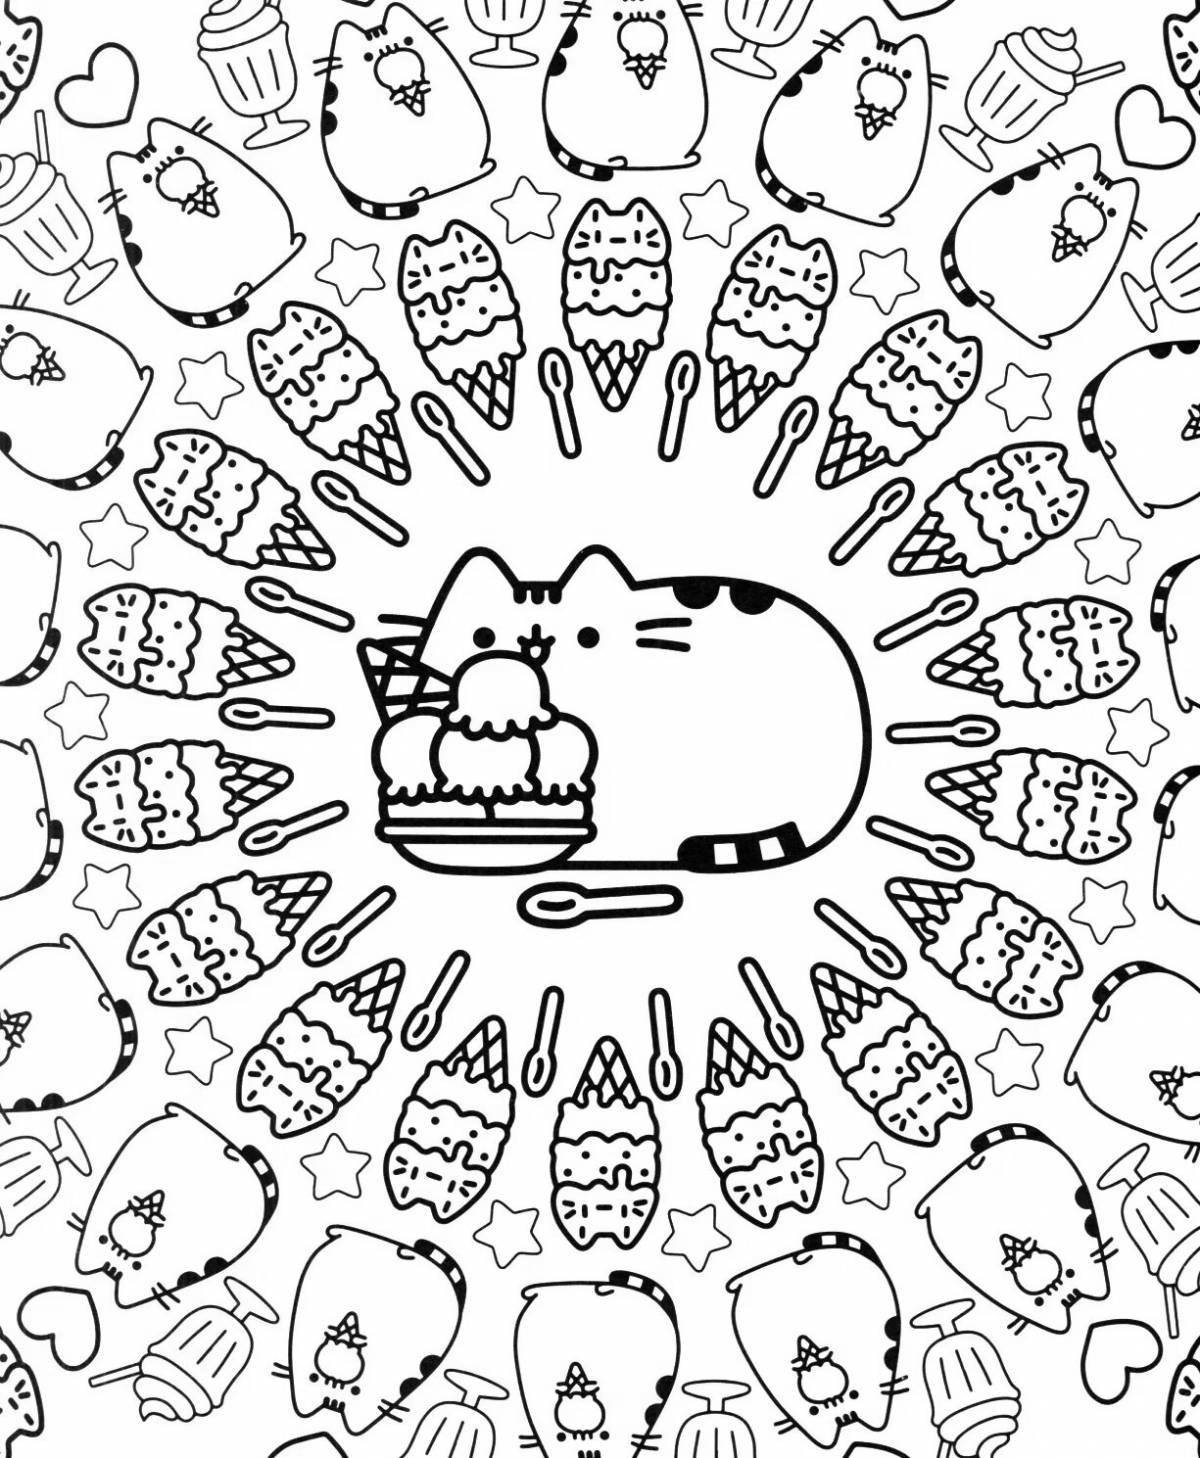 Pushin's bubble cat coloring page